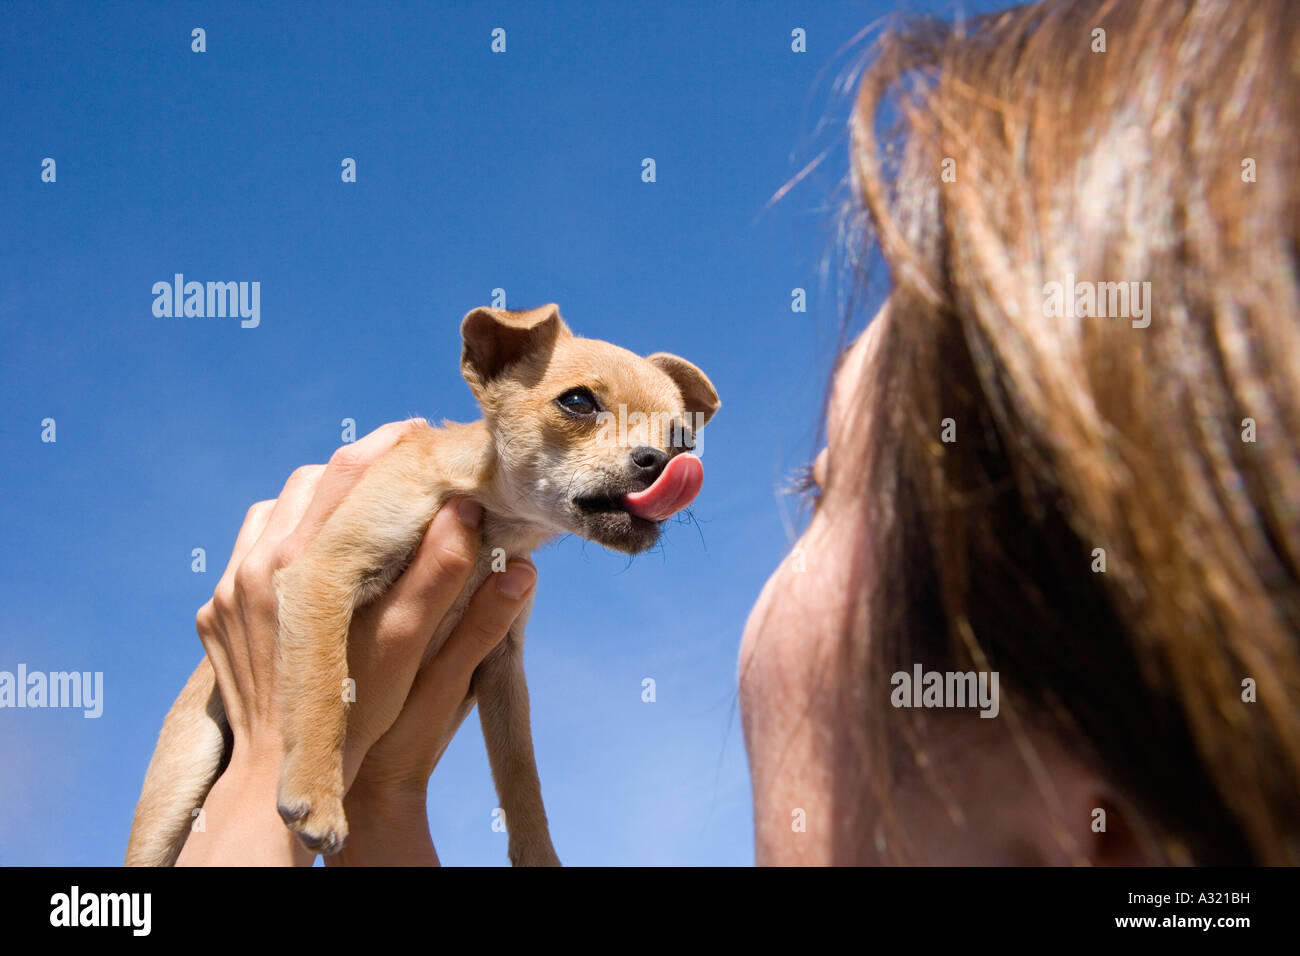 Woman holding a Chihuahua puppy Stock Photo